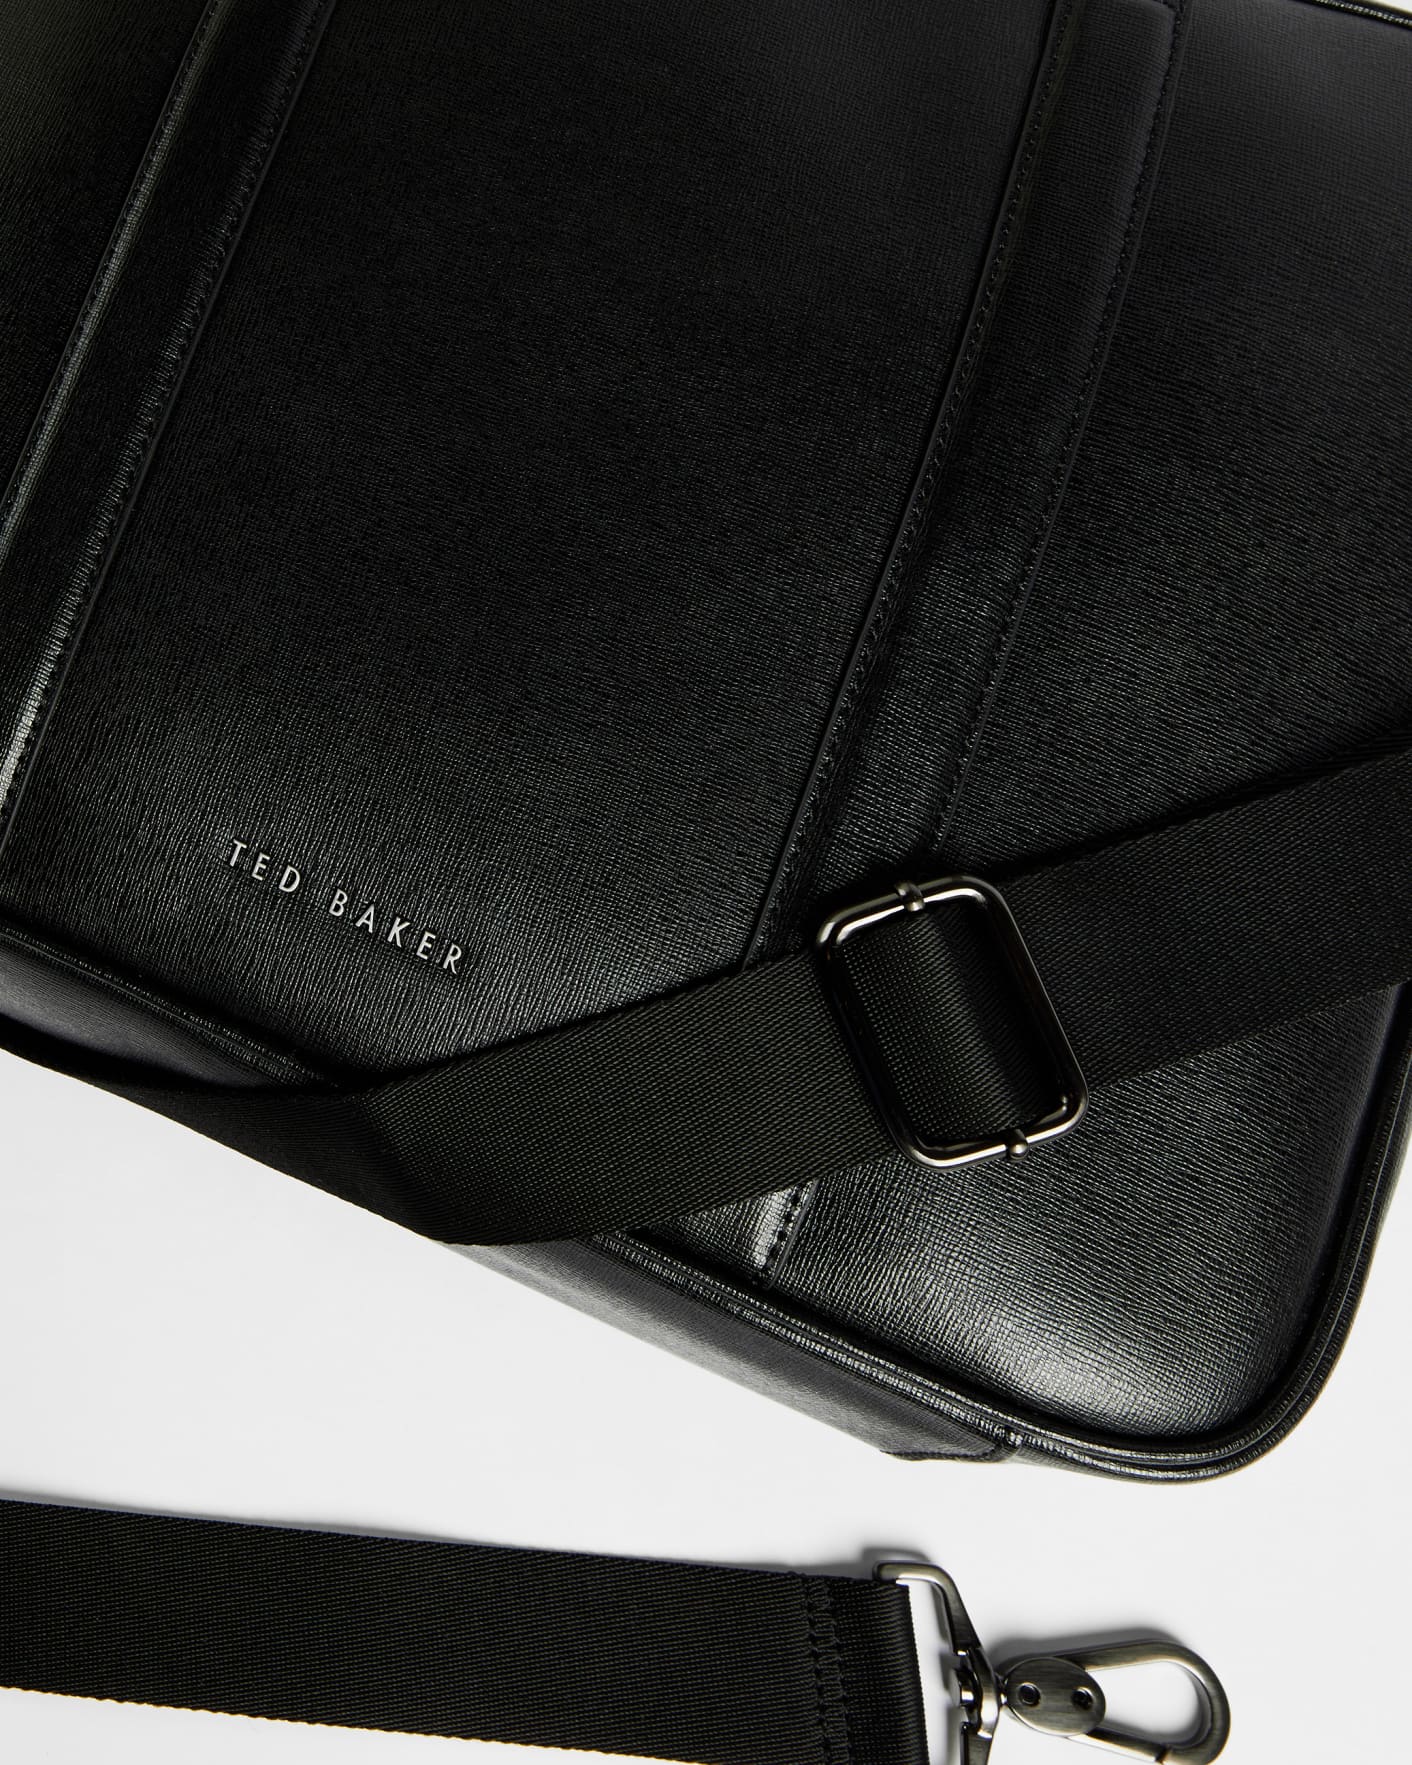 Black Saffiano Leather Document Bag Ted Baker